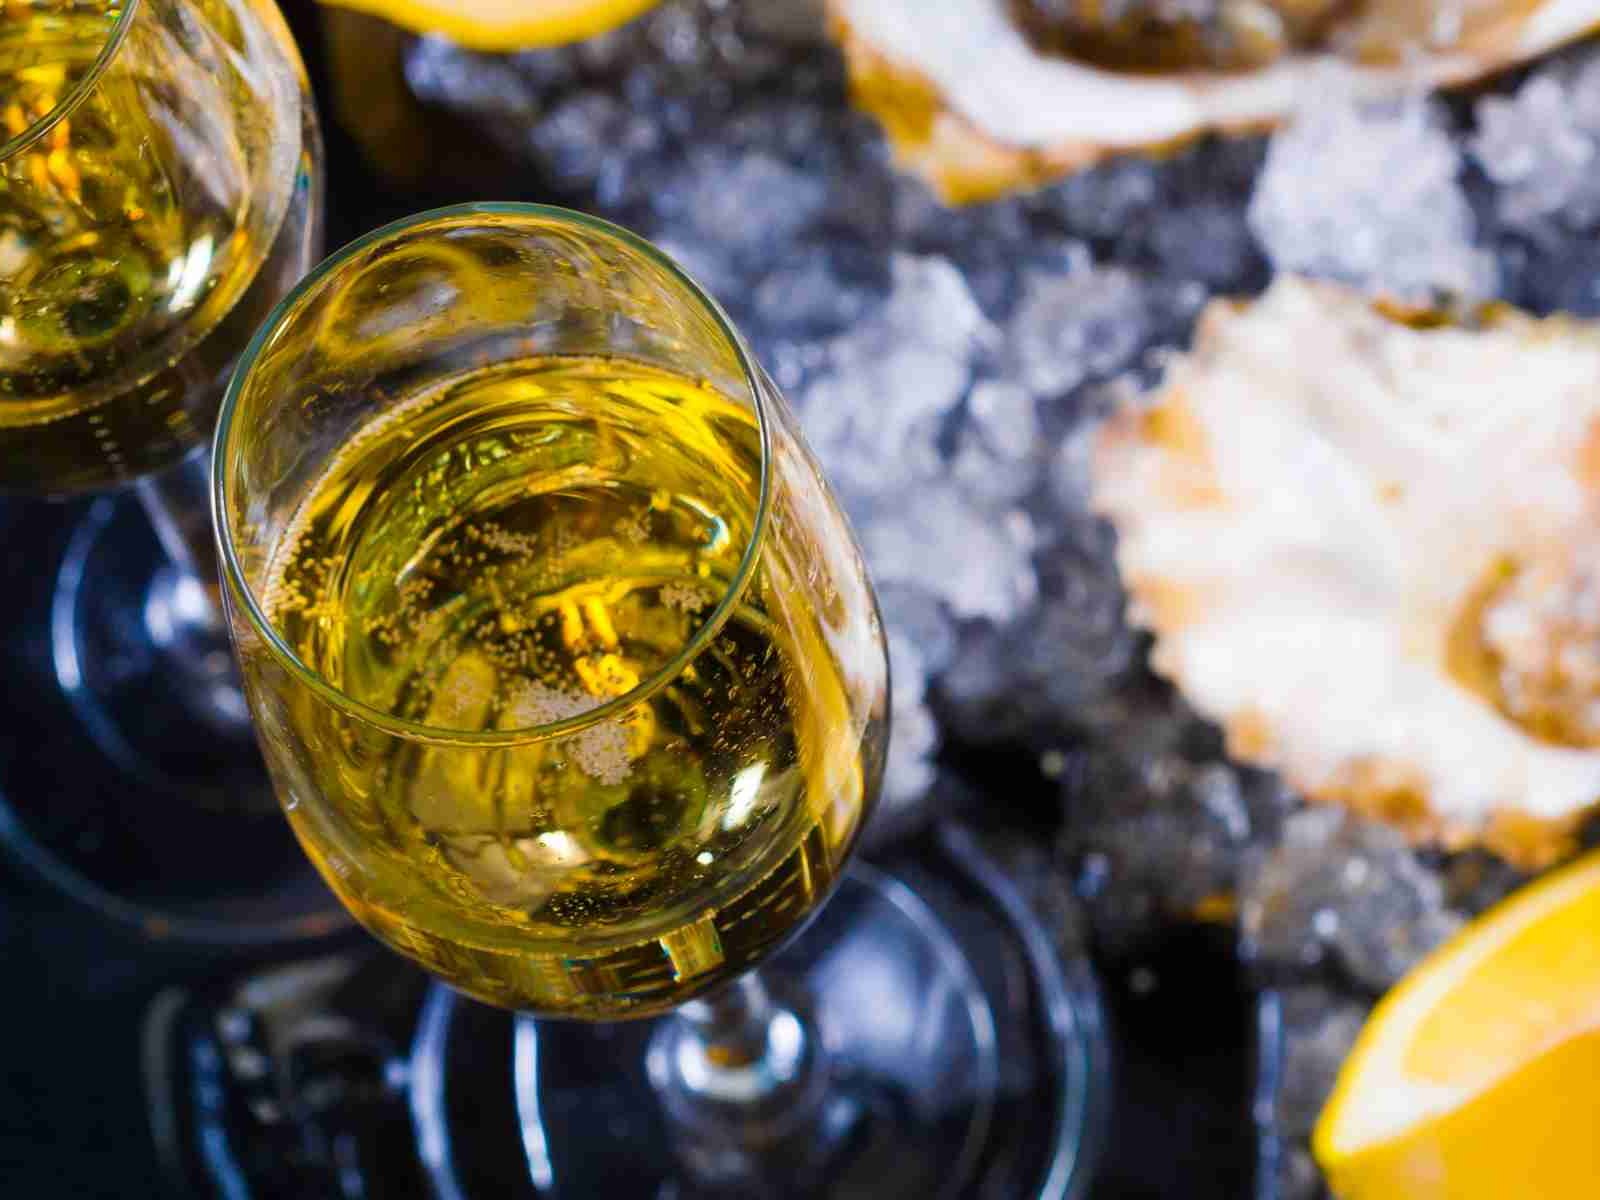 Champagne and oysters: the classic pairing